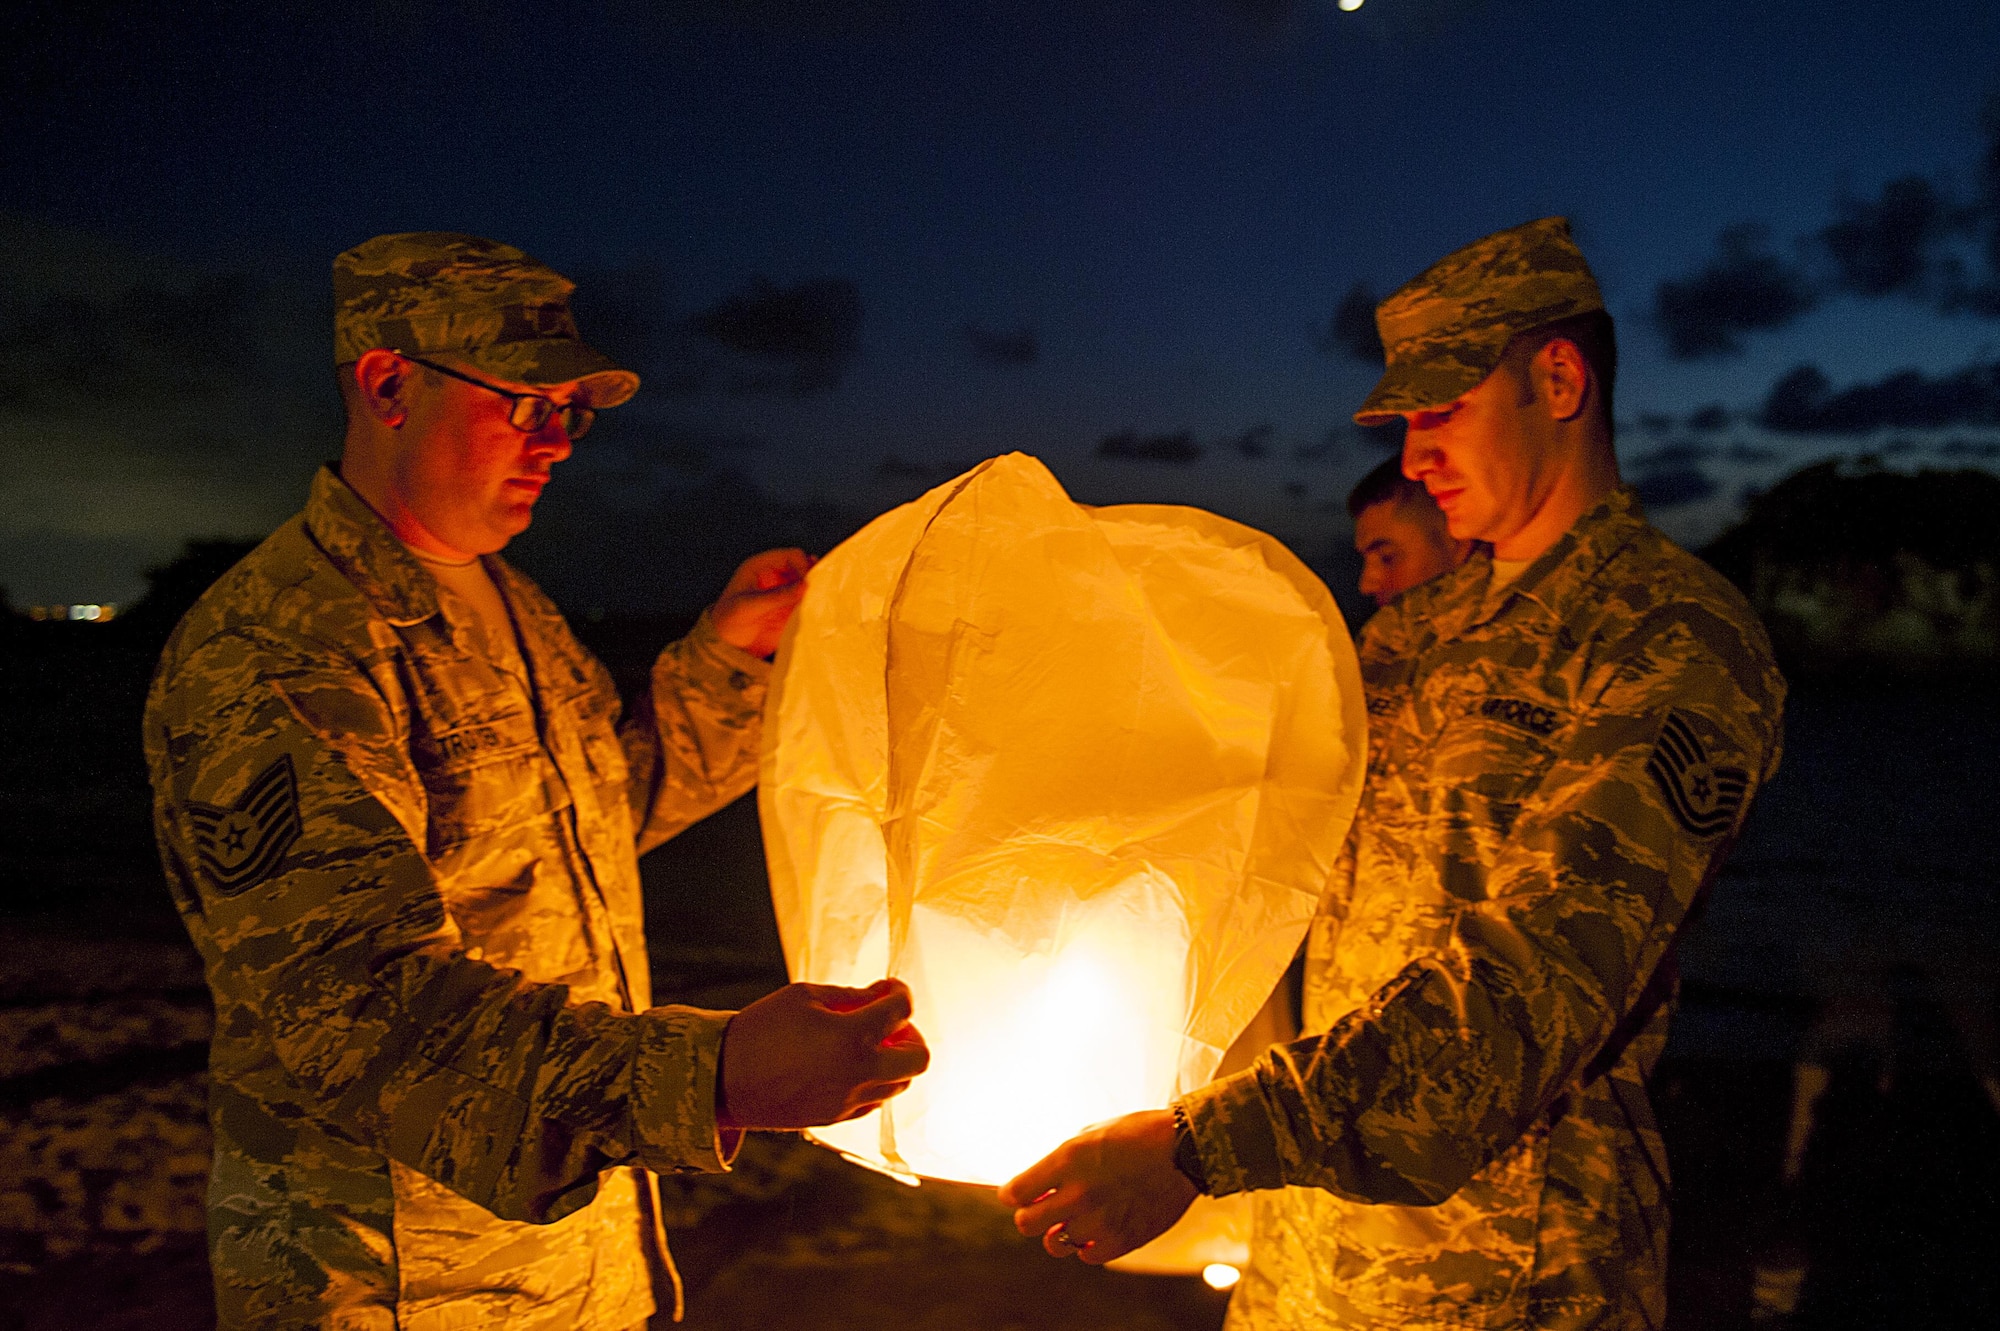 U.S. Air Force Tech. Sgt. Ezequiel Rodriguez, 18th Operations Support Squadron NCO in charge of airfield management and Tech. Sgt. Dustin Troyer, 18th OSS deputy airfield manager, prepare to launch a sky lantern during the POW/MIA Sky Lantern Ceremony Sept. 17, 2015, at the Kadena Marina, Kadena Air Base, Japan. The lanterns were lit in remembrance of POWs and MIAs. (U.S. Air Force photo by Airman 1st Class Lynette M. Rolen/Released)